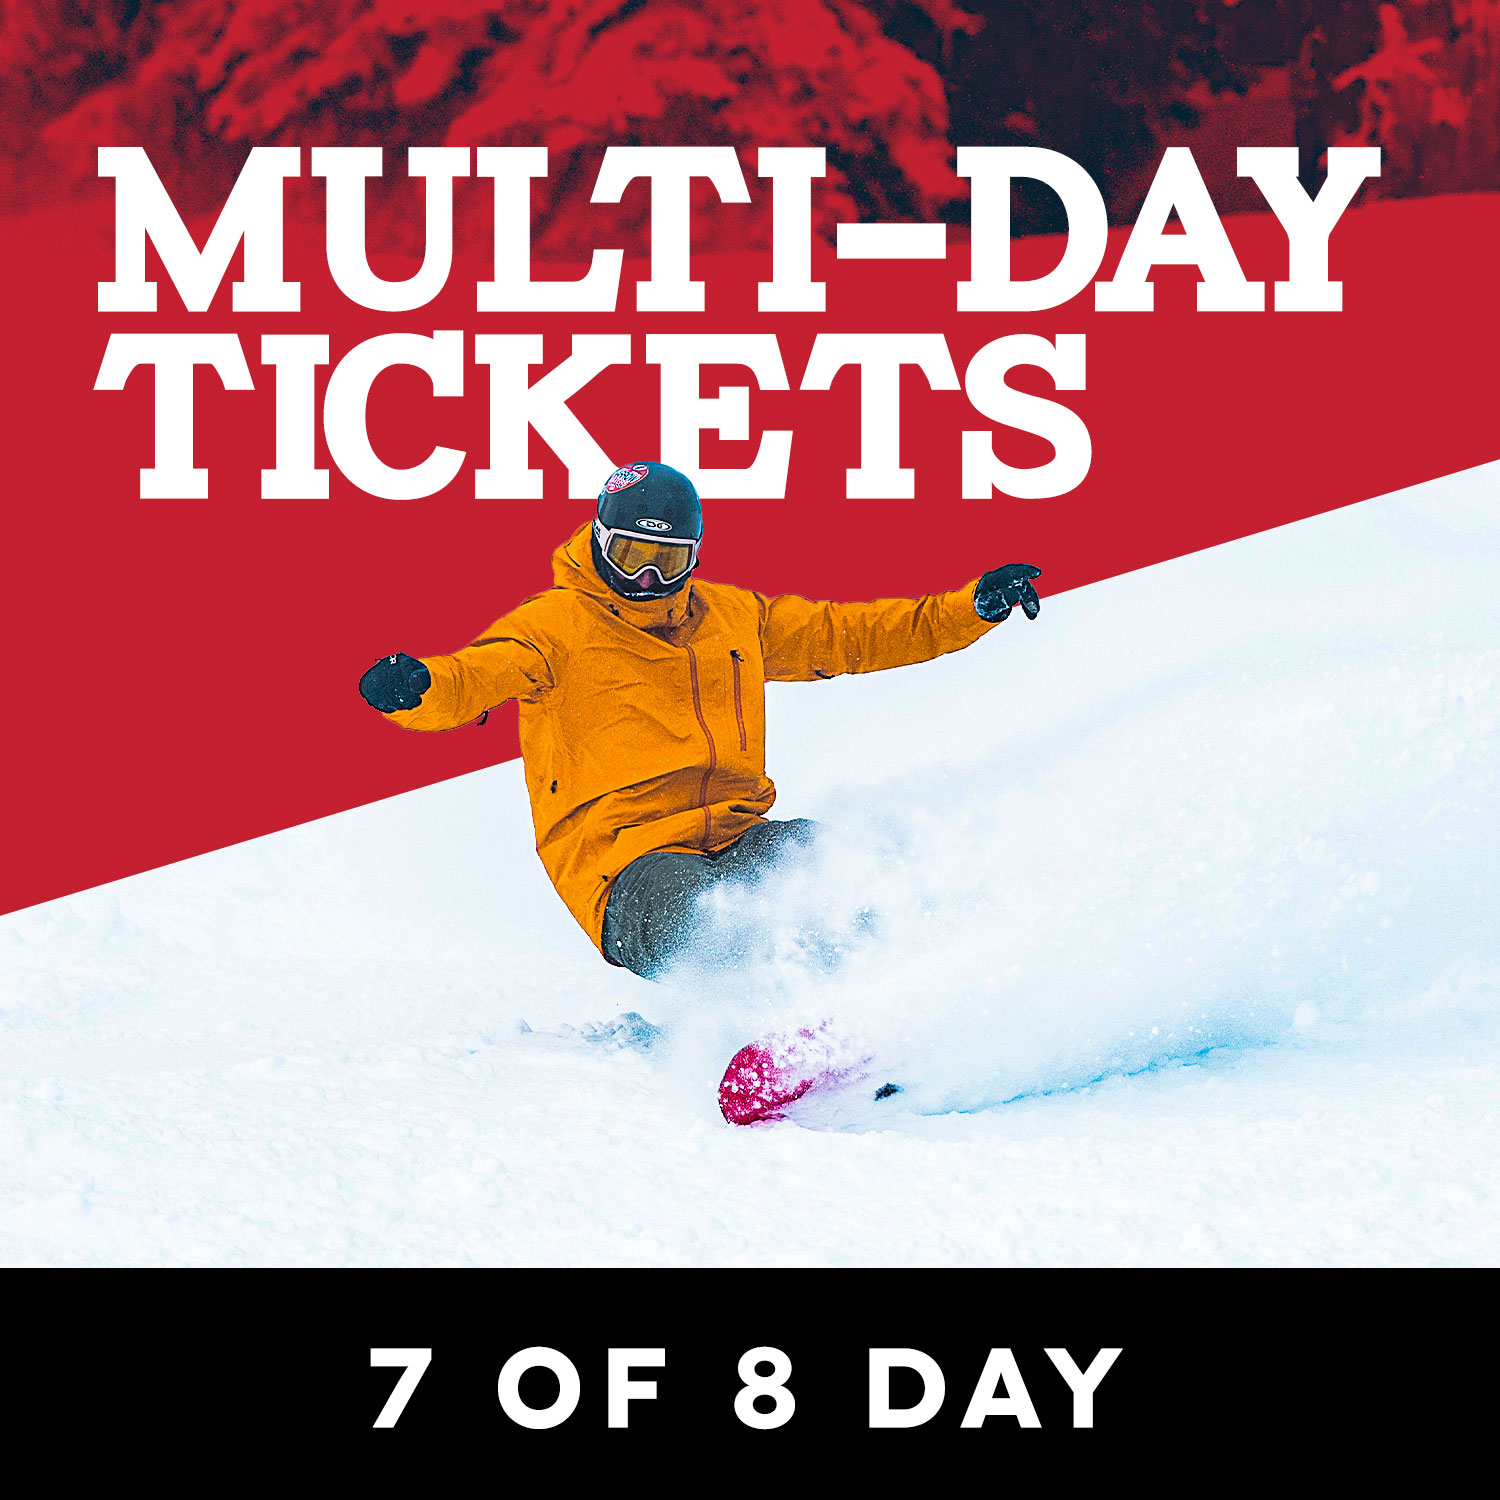 → 7 of 8 Day Ticket